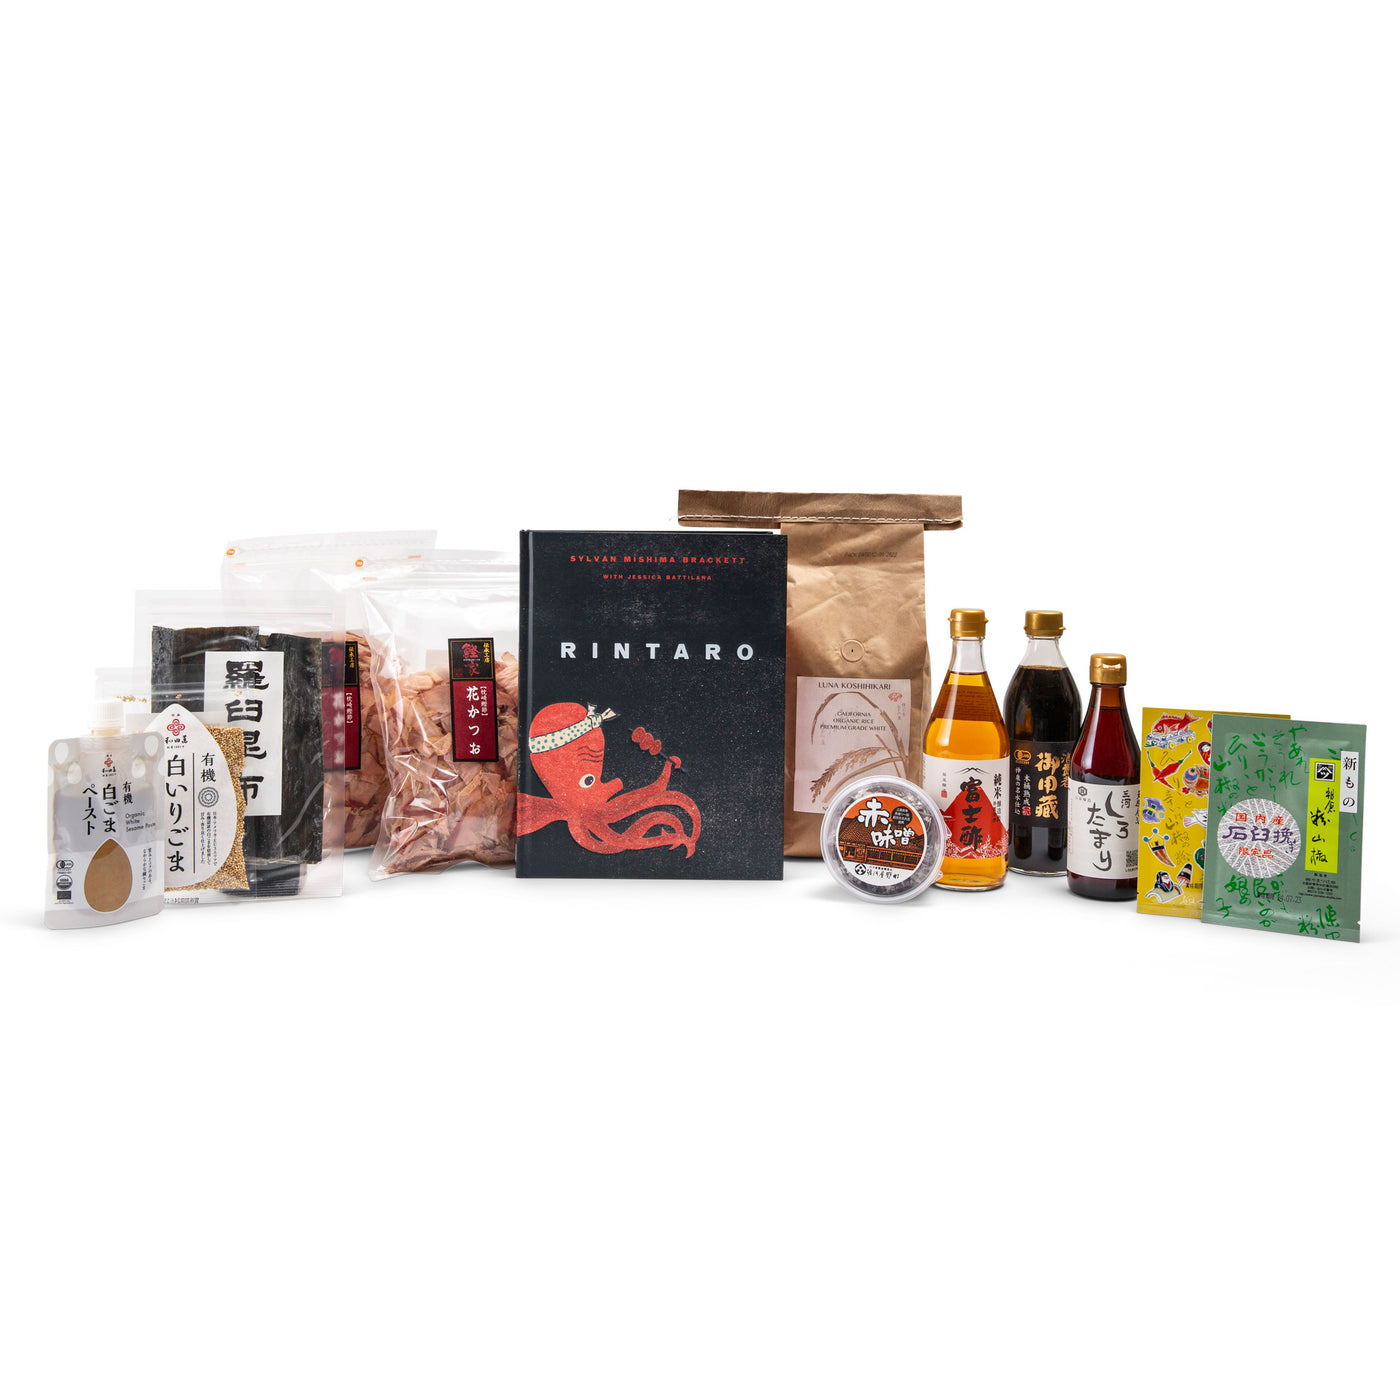 Rintaro x The Japanese Pantry Ingredient Box with Signed Cookbook and Rice!